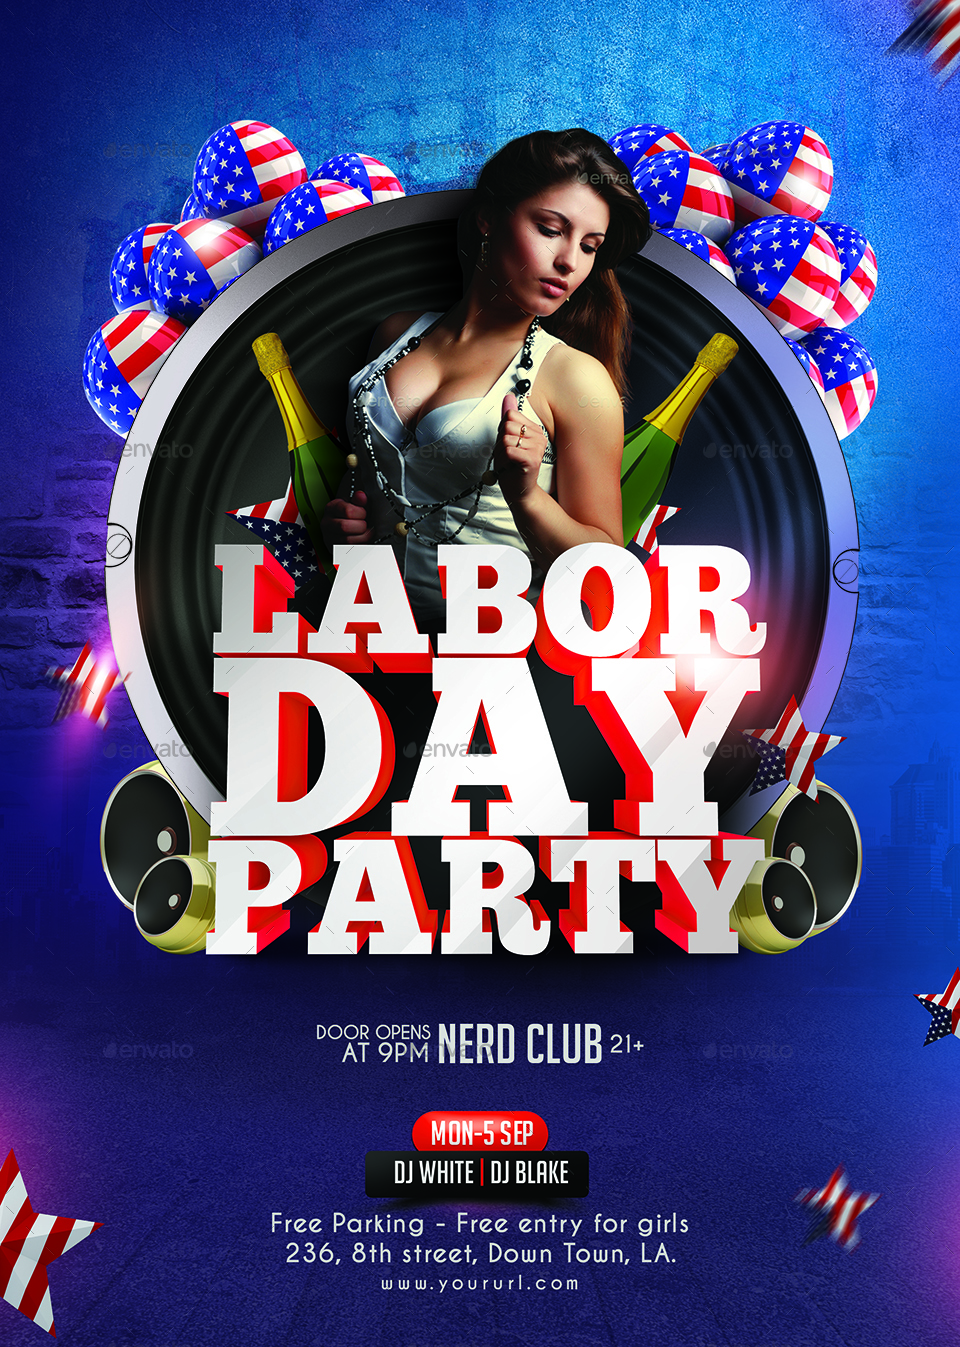 Labor Day Flyer Template Free from s3.envato.com